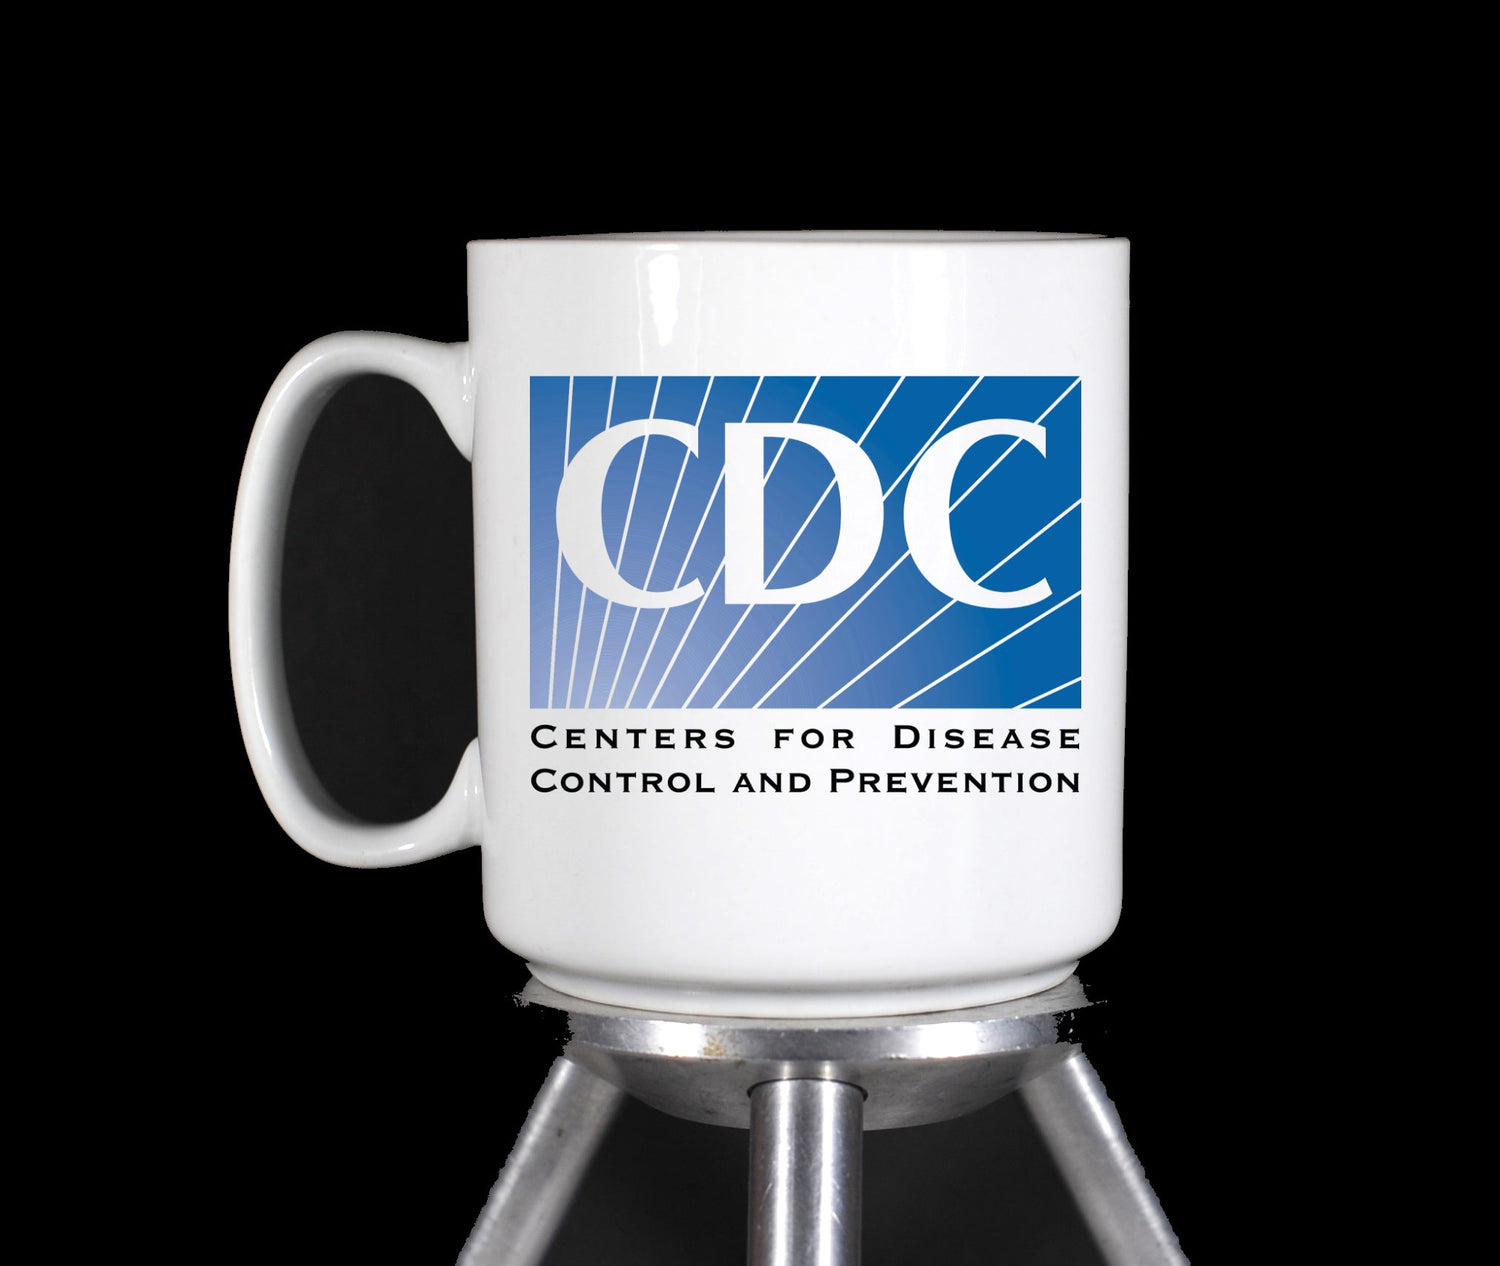 CDC (Centers for Disease Control and Prevention) Coffee Mug by TheGlassyLass.com